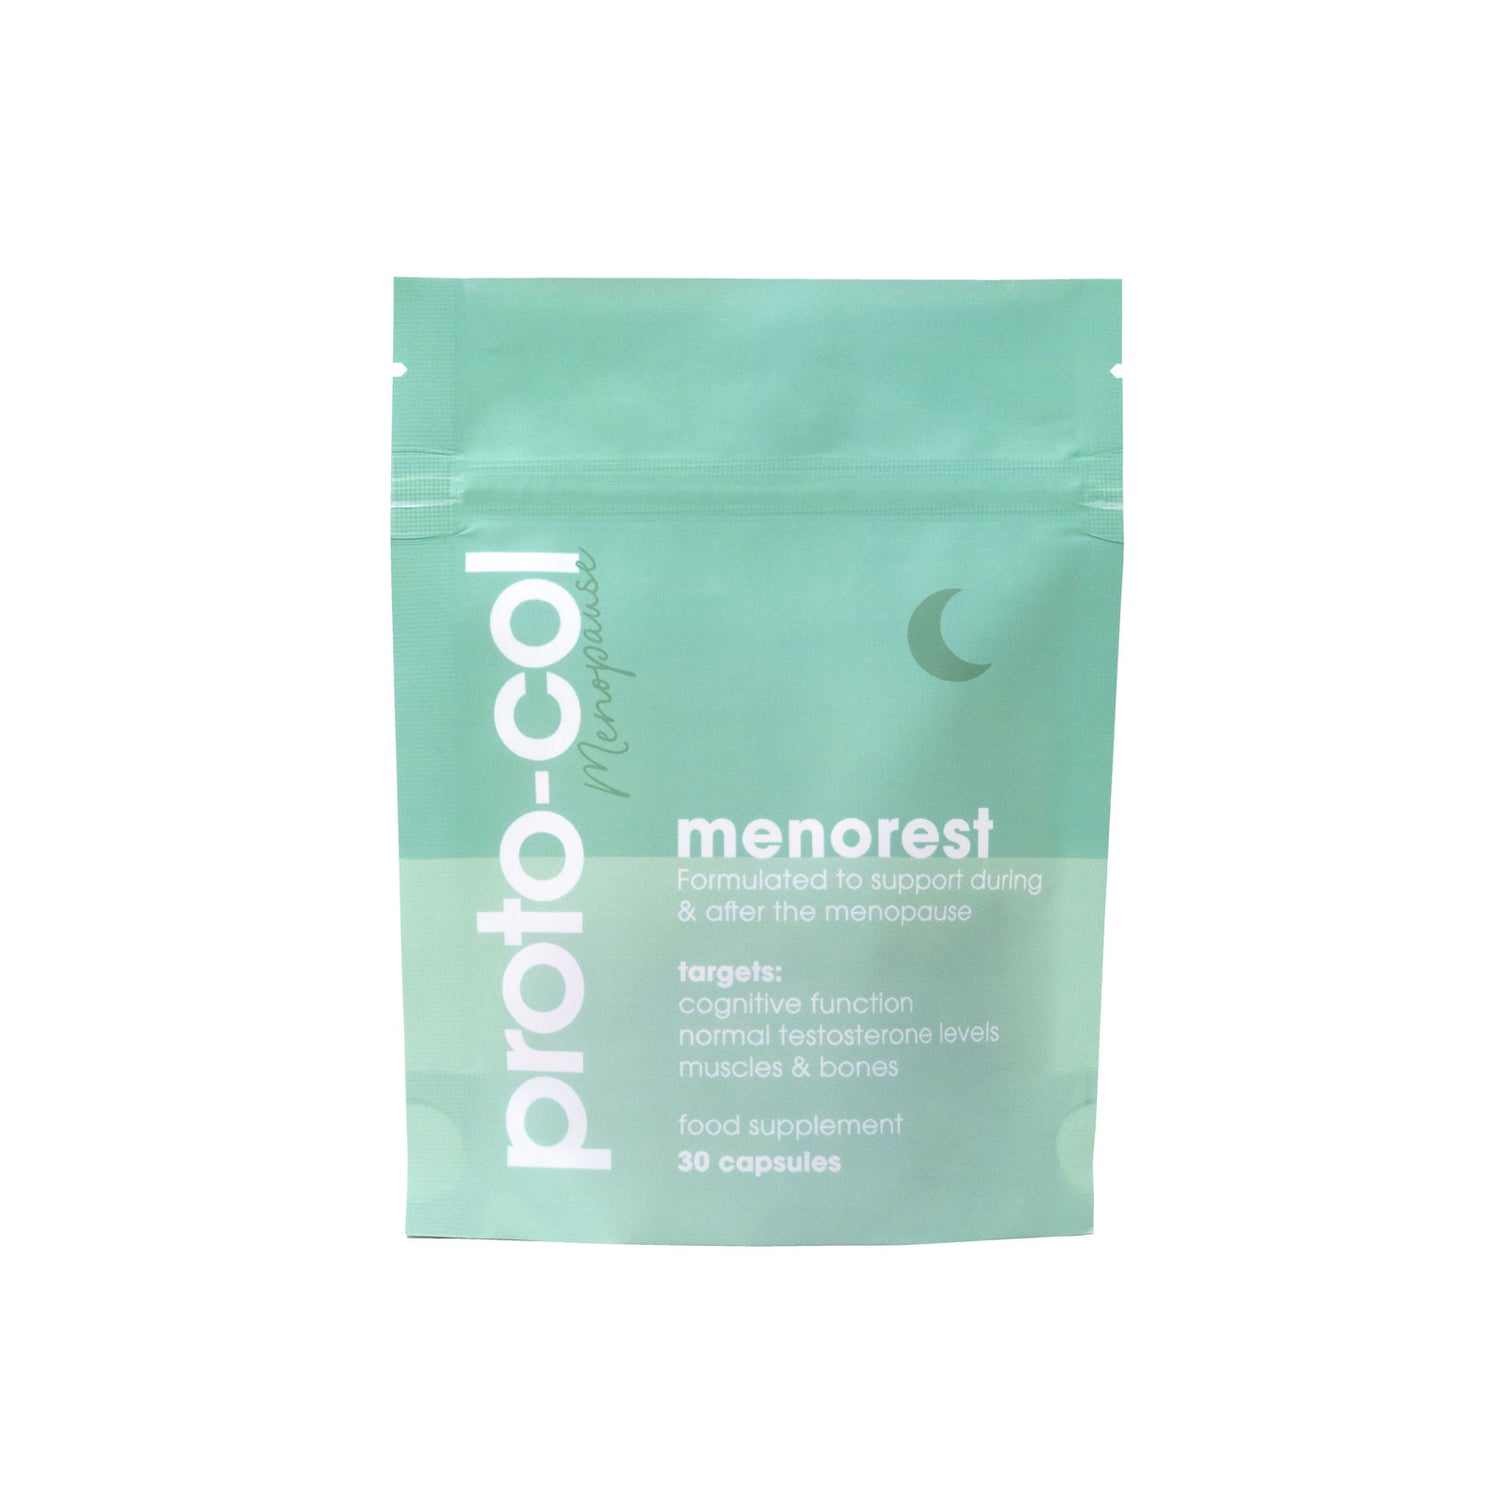 Menopause Month - Get 20% off with code MENO20